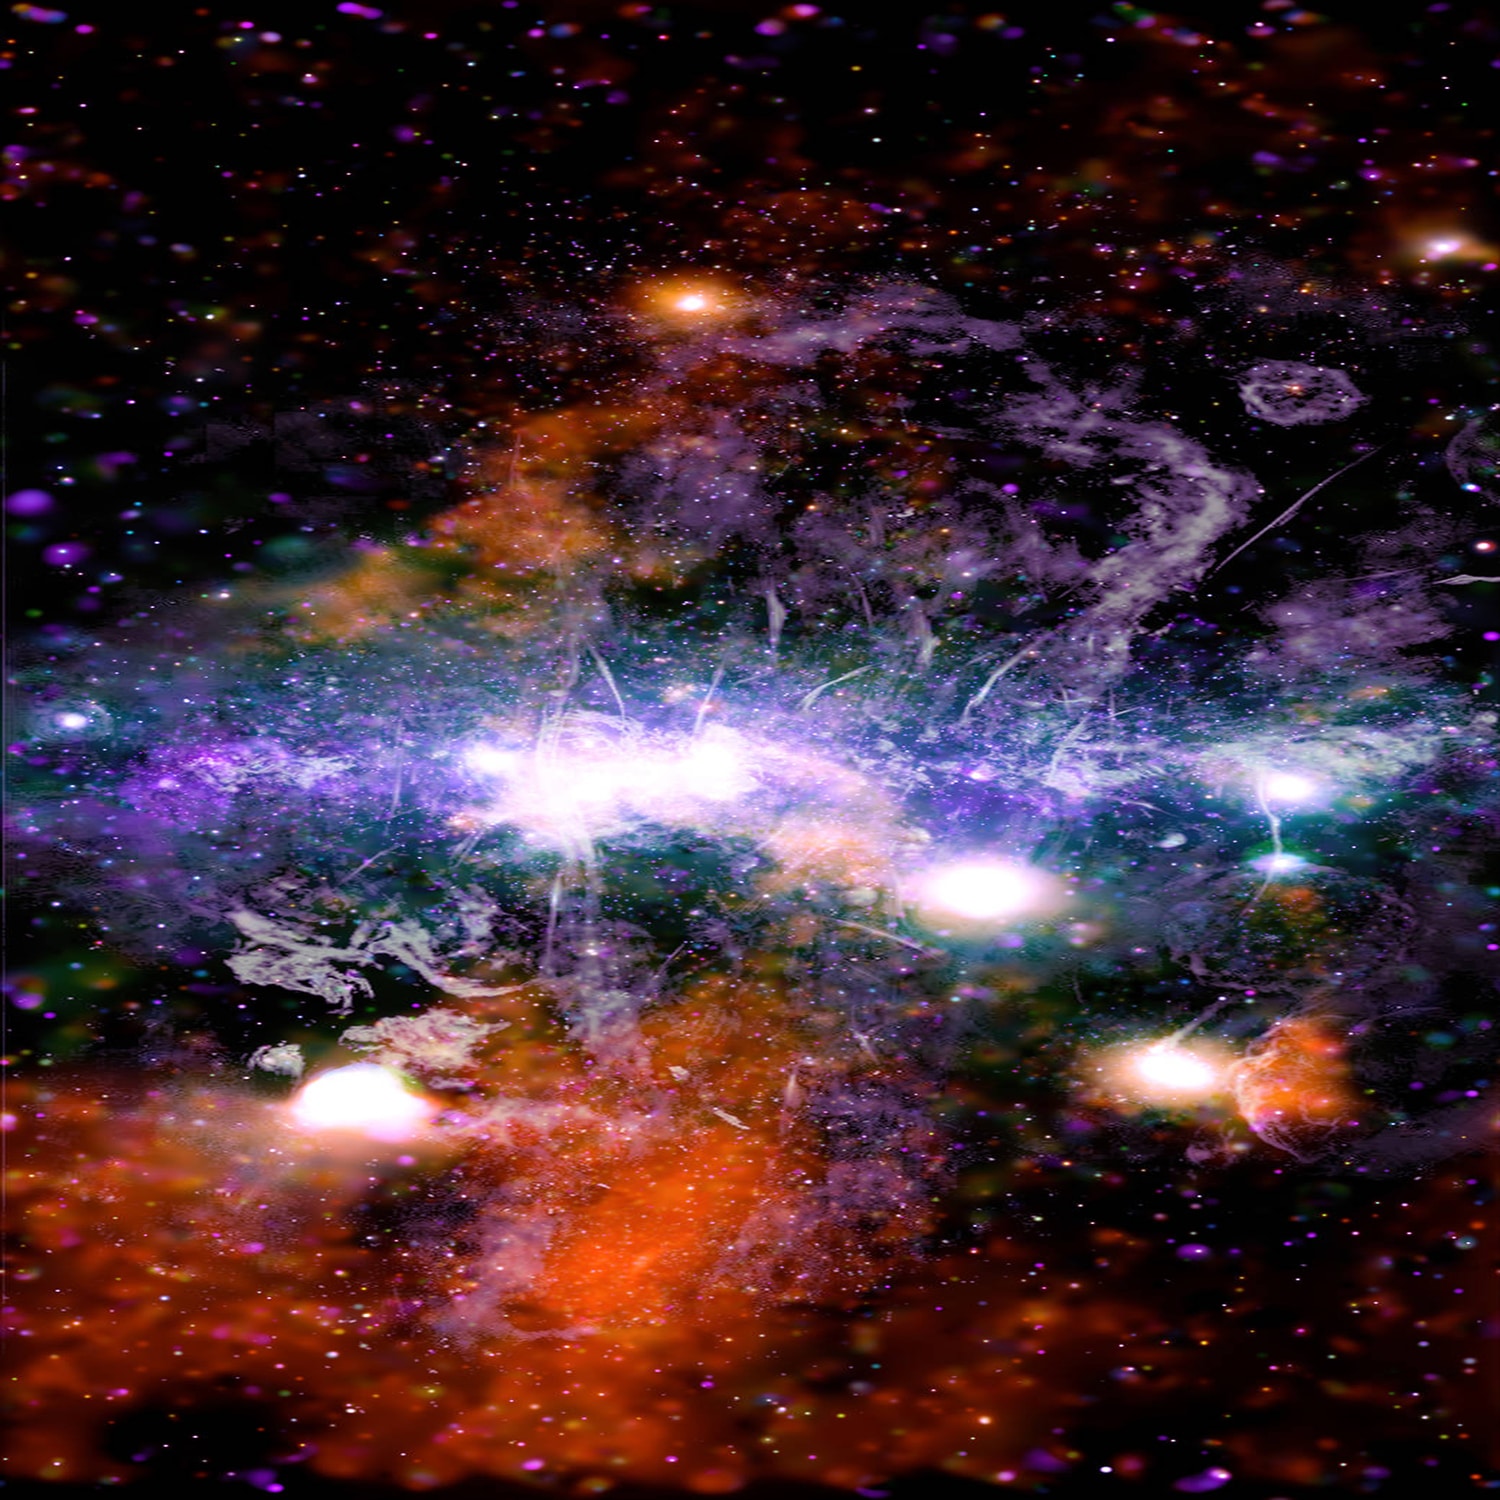 NASA has published an unparalleled image of the Milky Way center